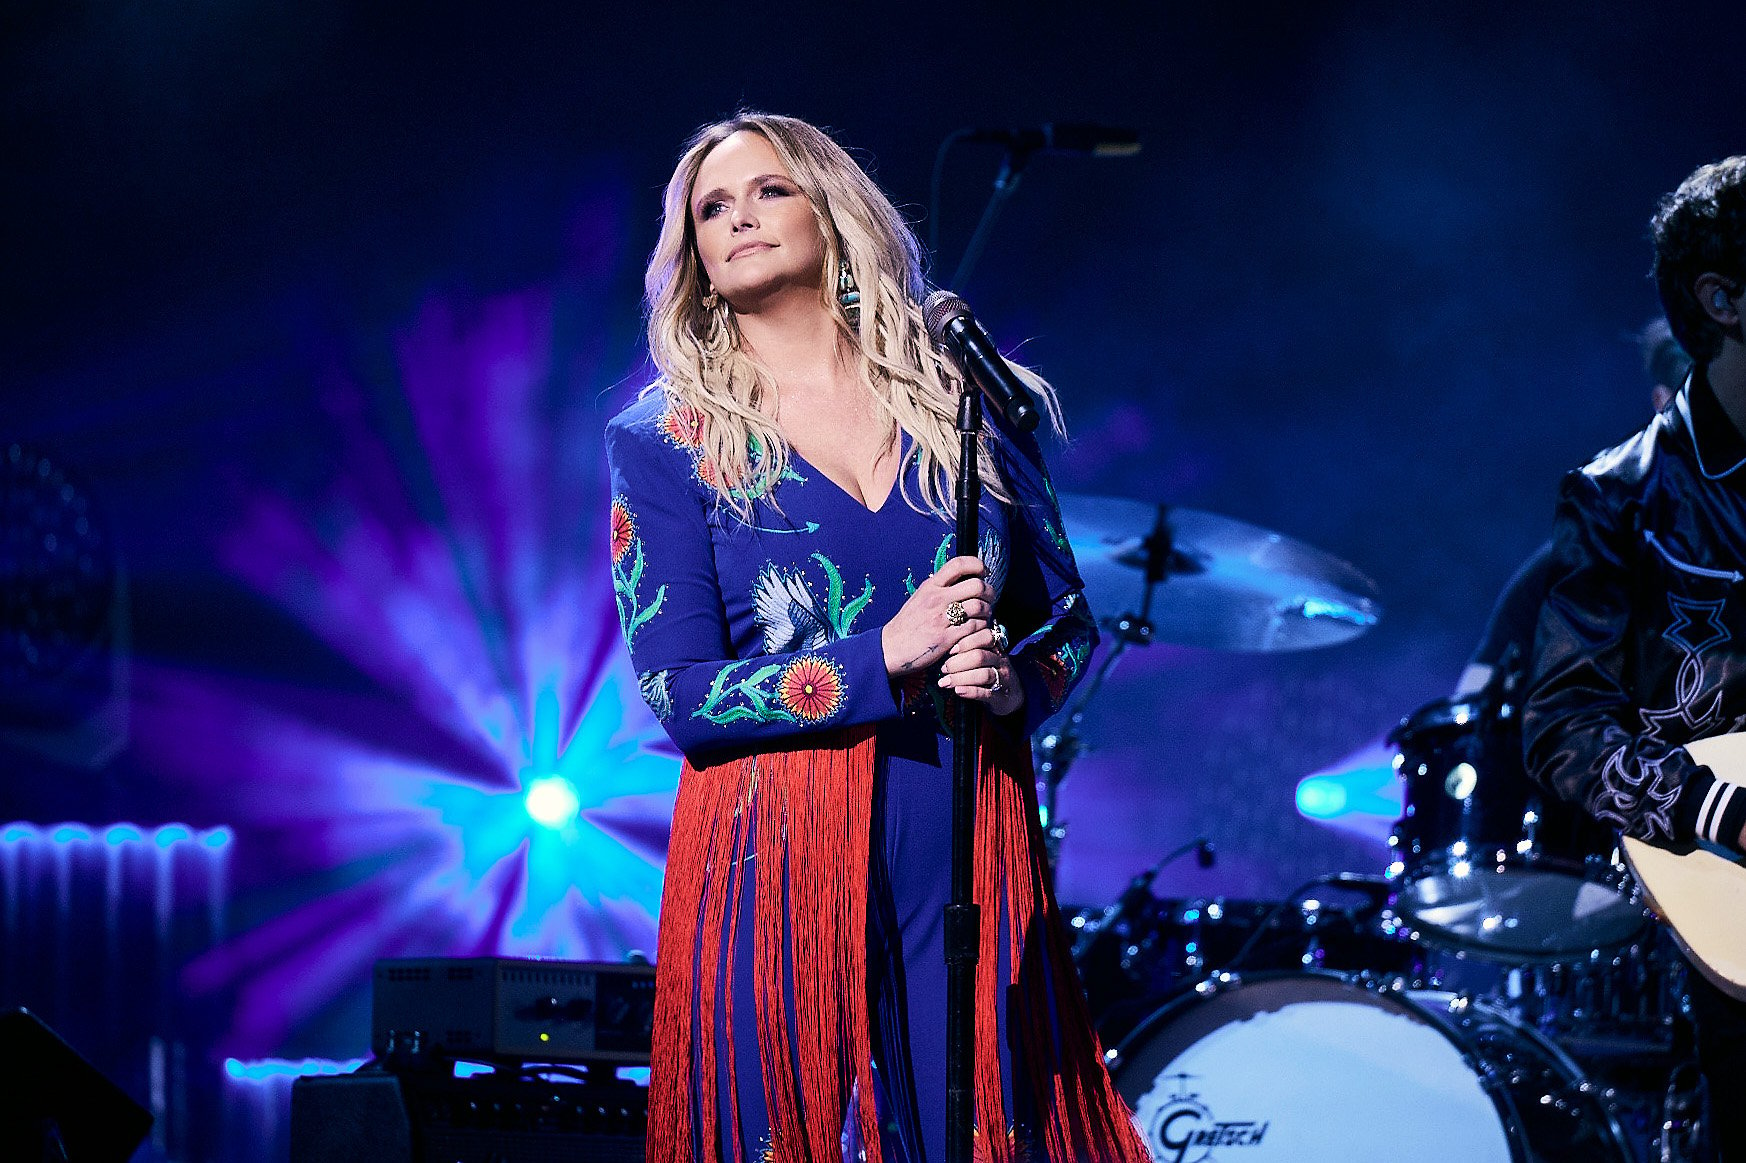 Miranda Lambert holds a microphone stand while wearing a blue-and-red outfit